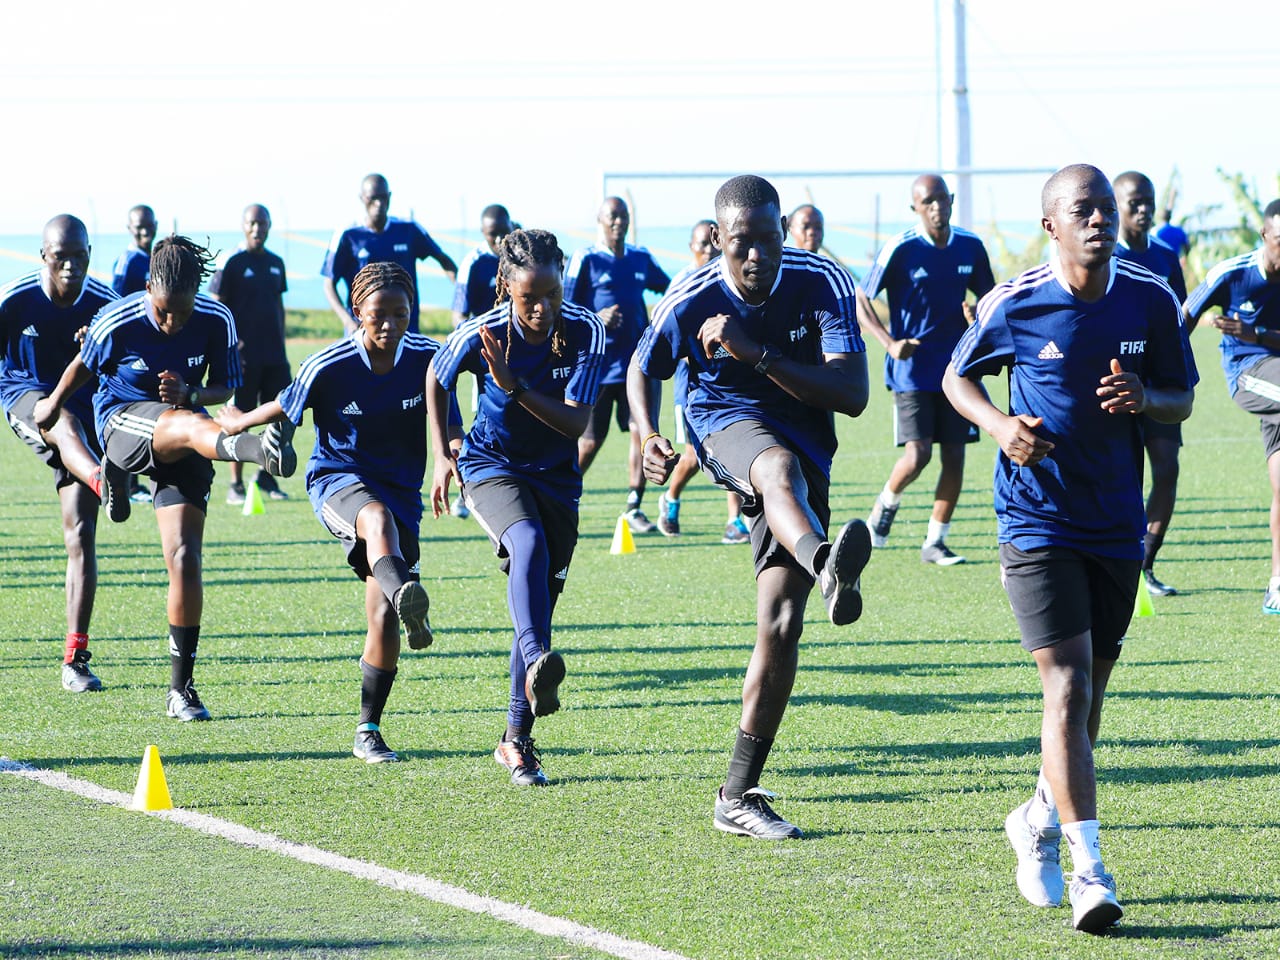 FIFA Member Association Referees Course commences at FUFA Technical Center